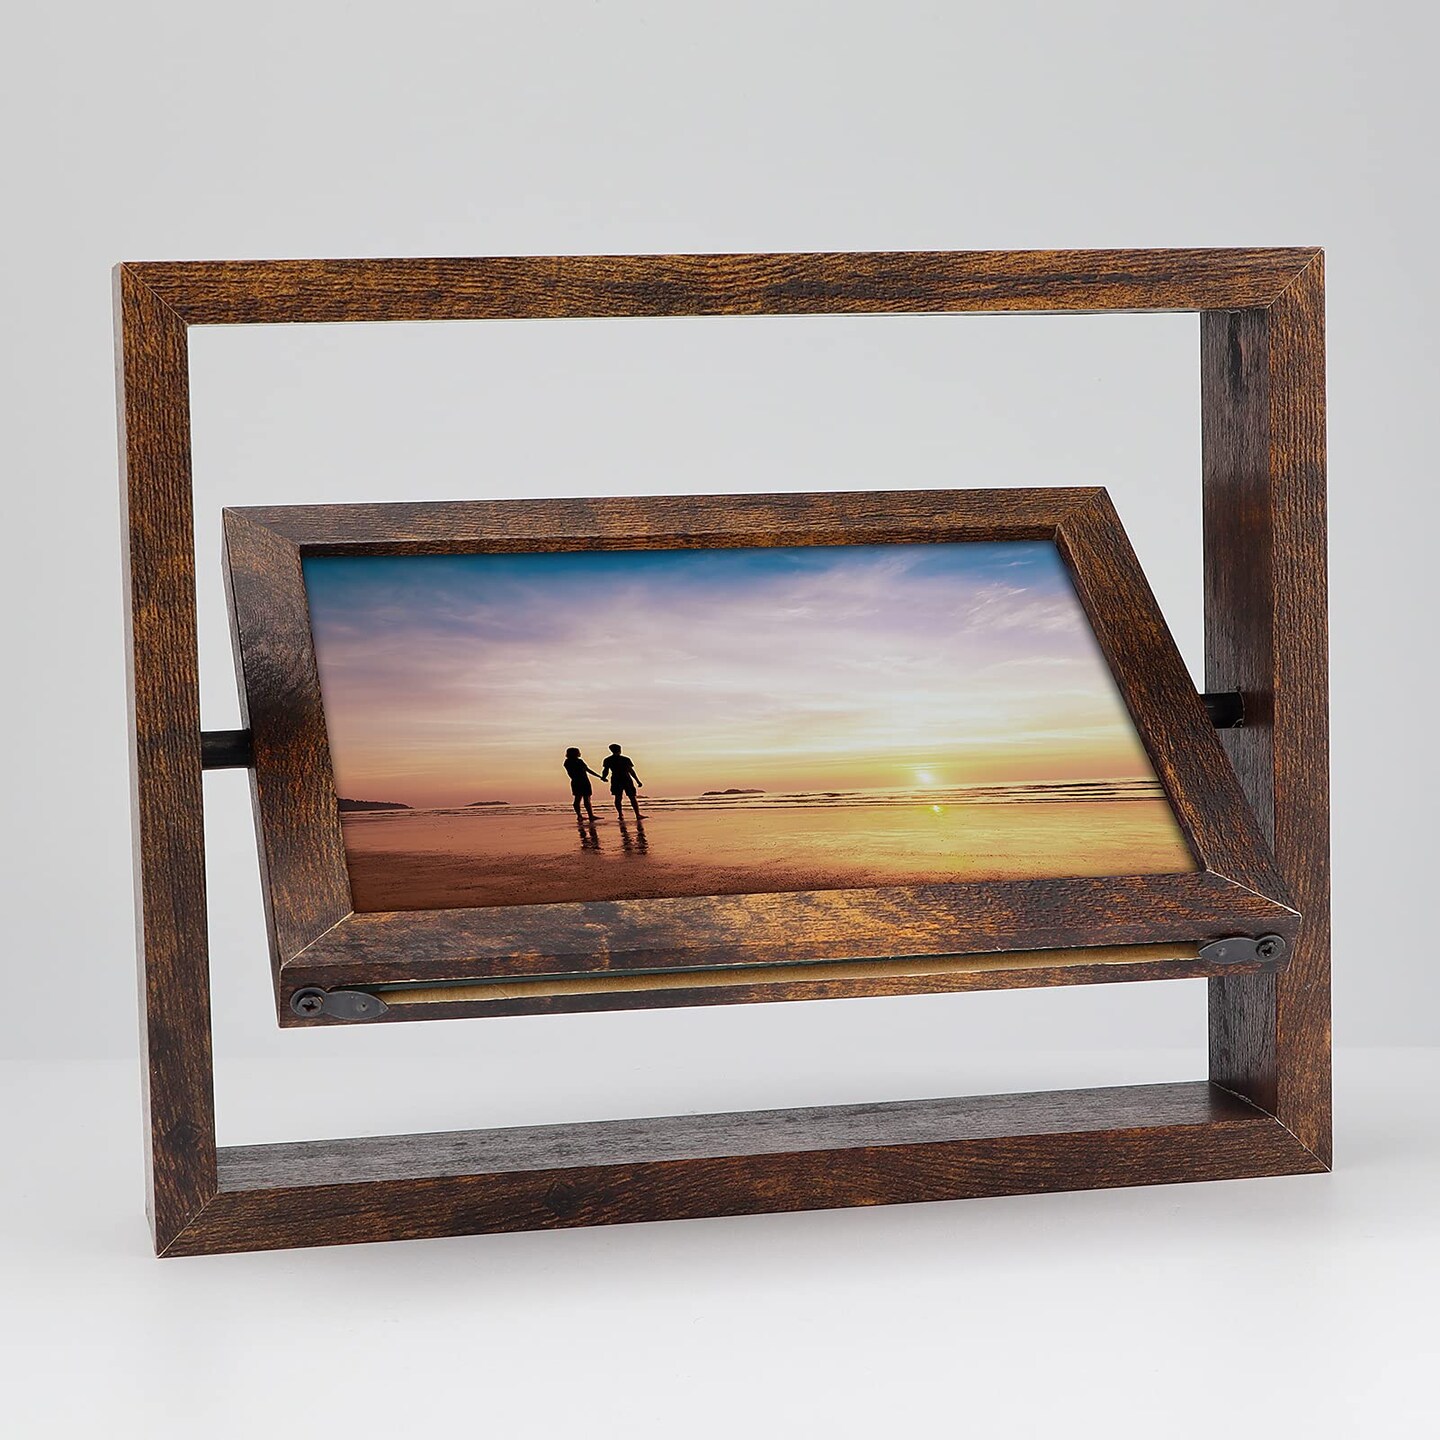 EXYGLO 2 Pack 5x7 Rustic Rotating Floating Picture Frames, Photo Frames for Vertical or Horizontal Tabletop Display, Brown